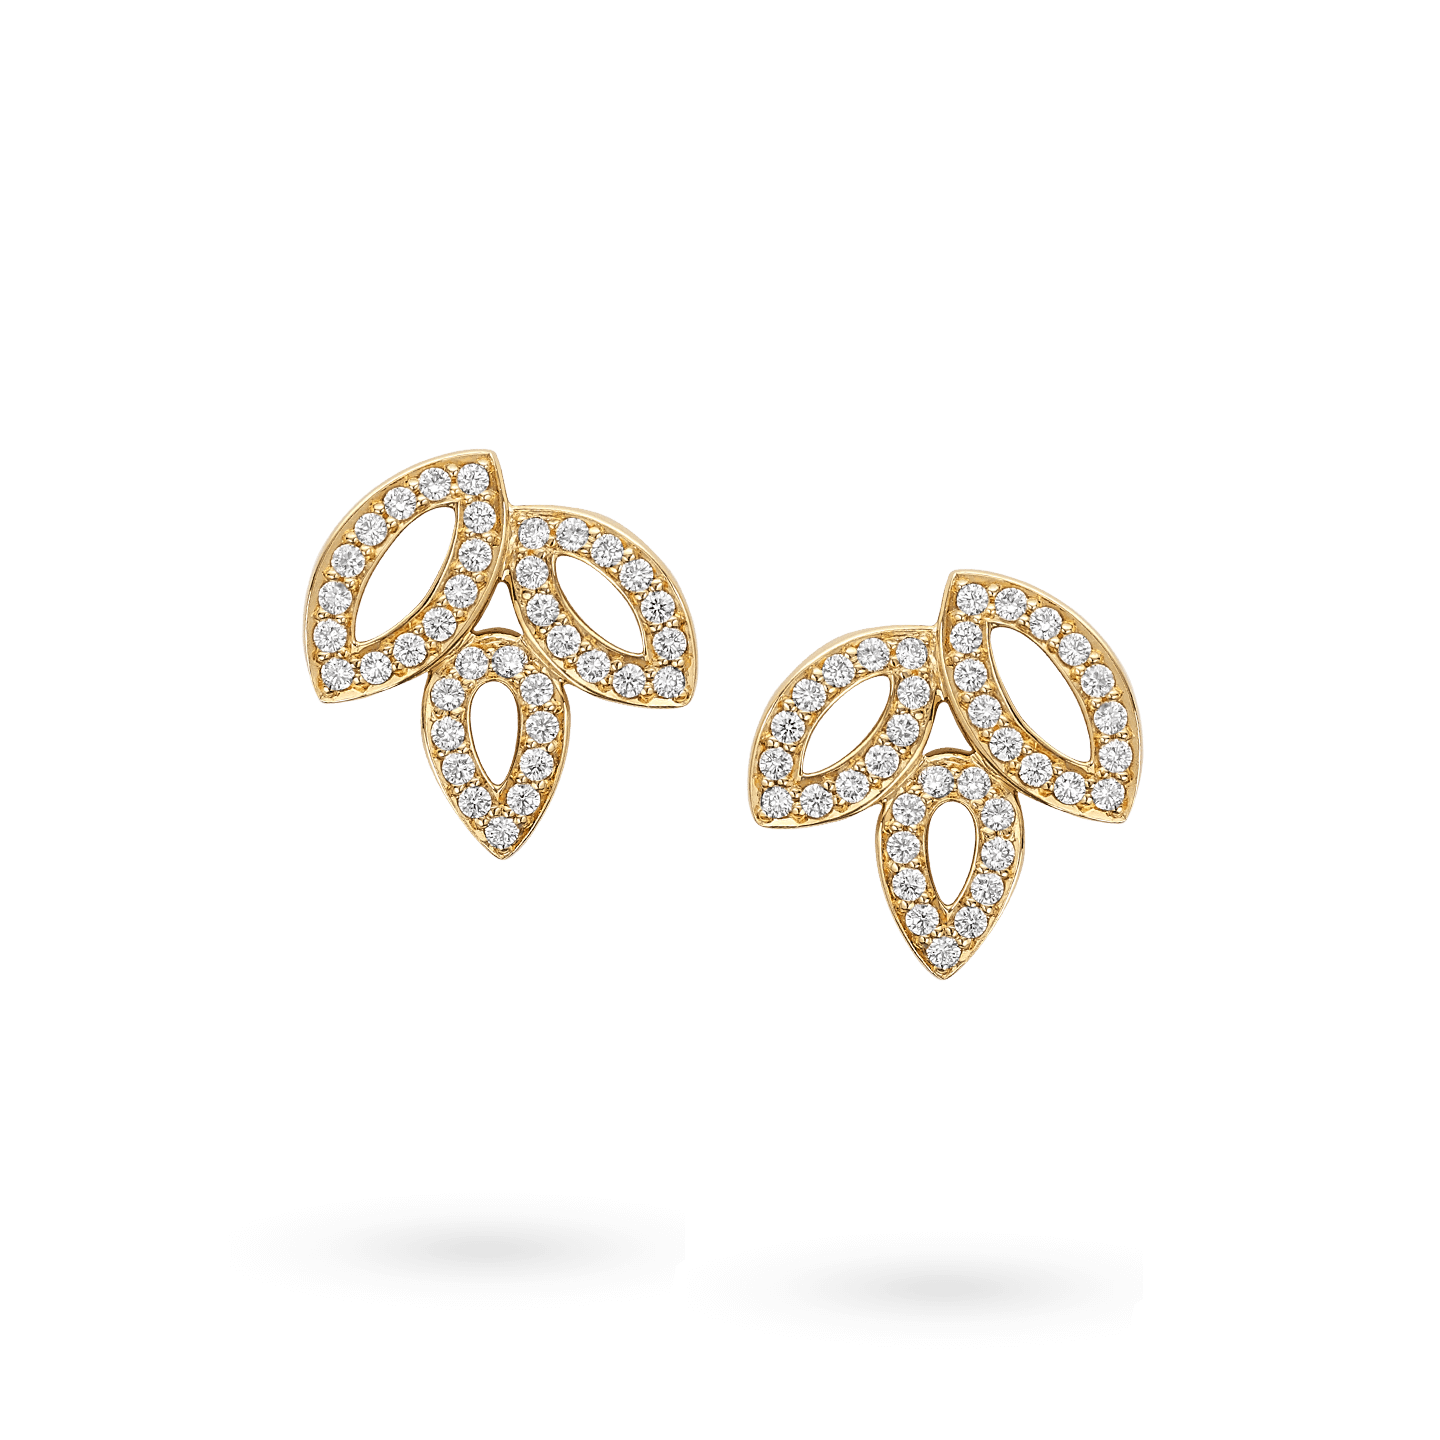 Lily Cluster Small Diamond Earrings in Yellow Gold, Product Image 1